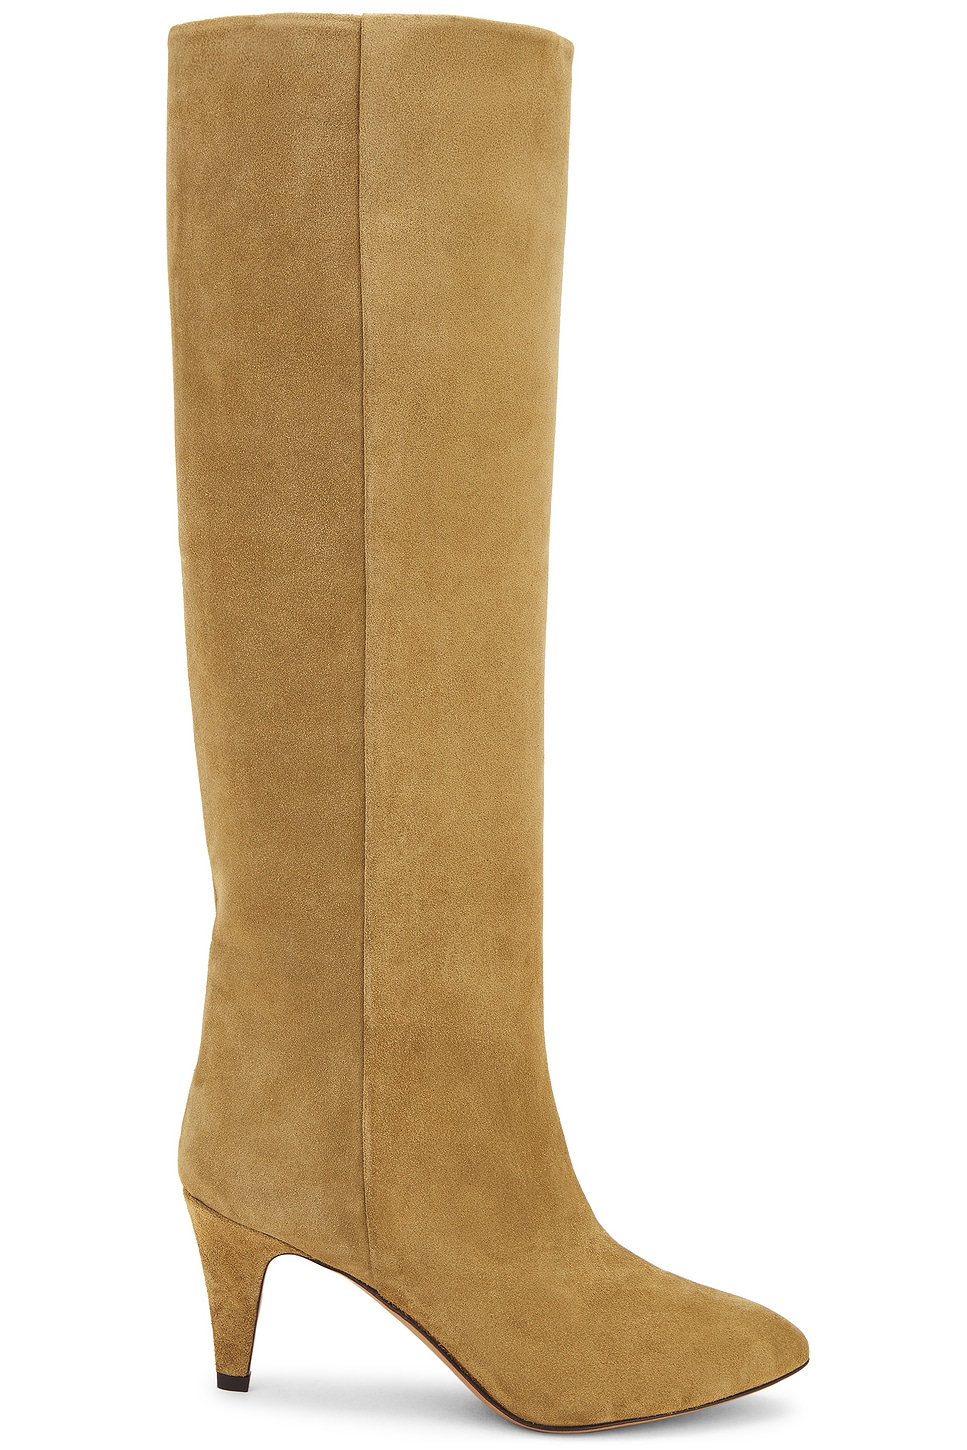 Laspi Suede Boot in Tan